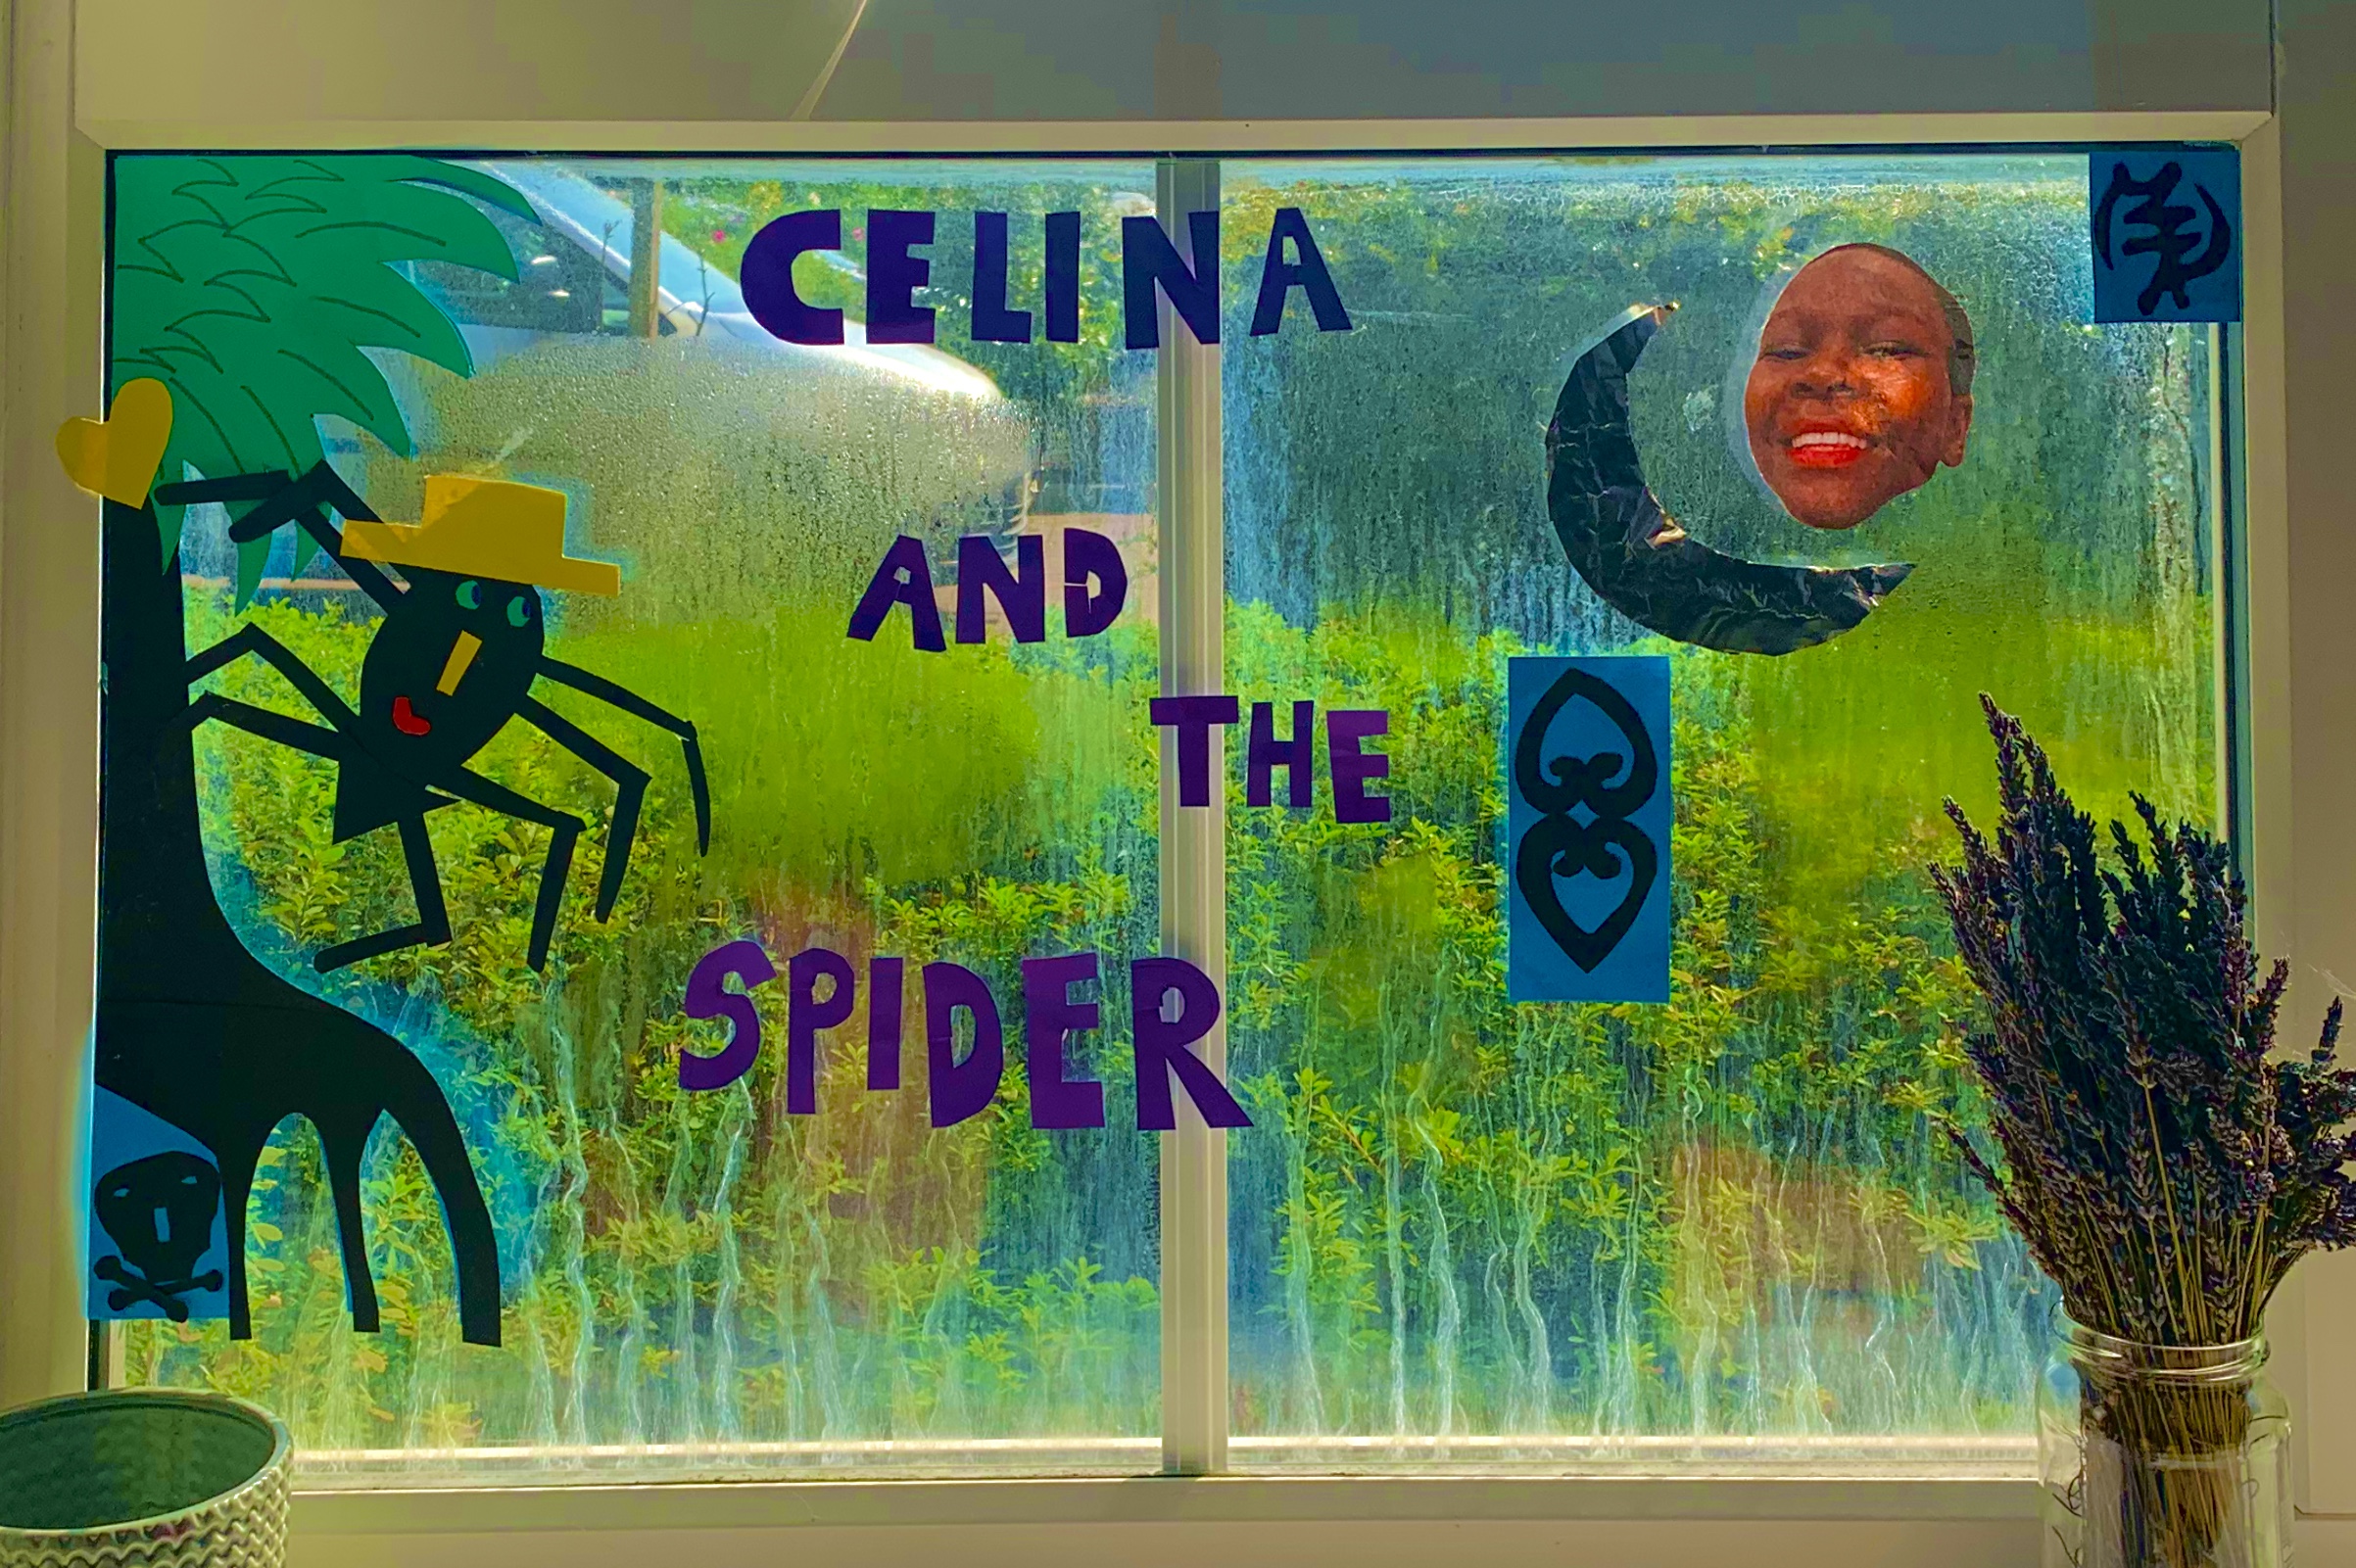 Celina and the Spider storytime session